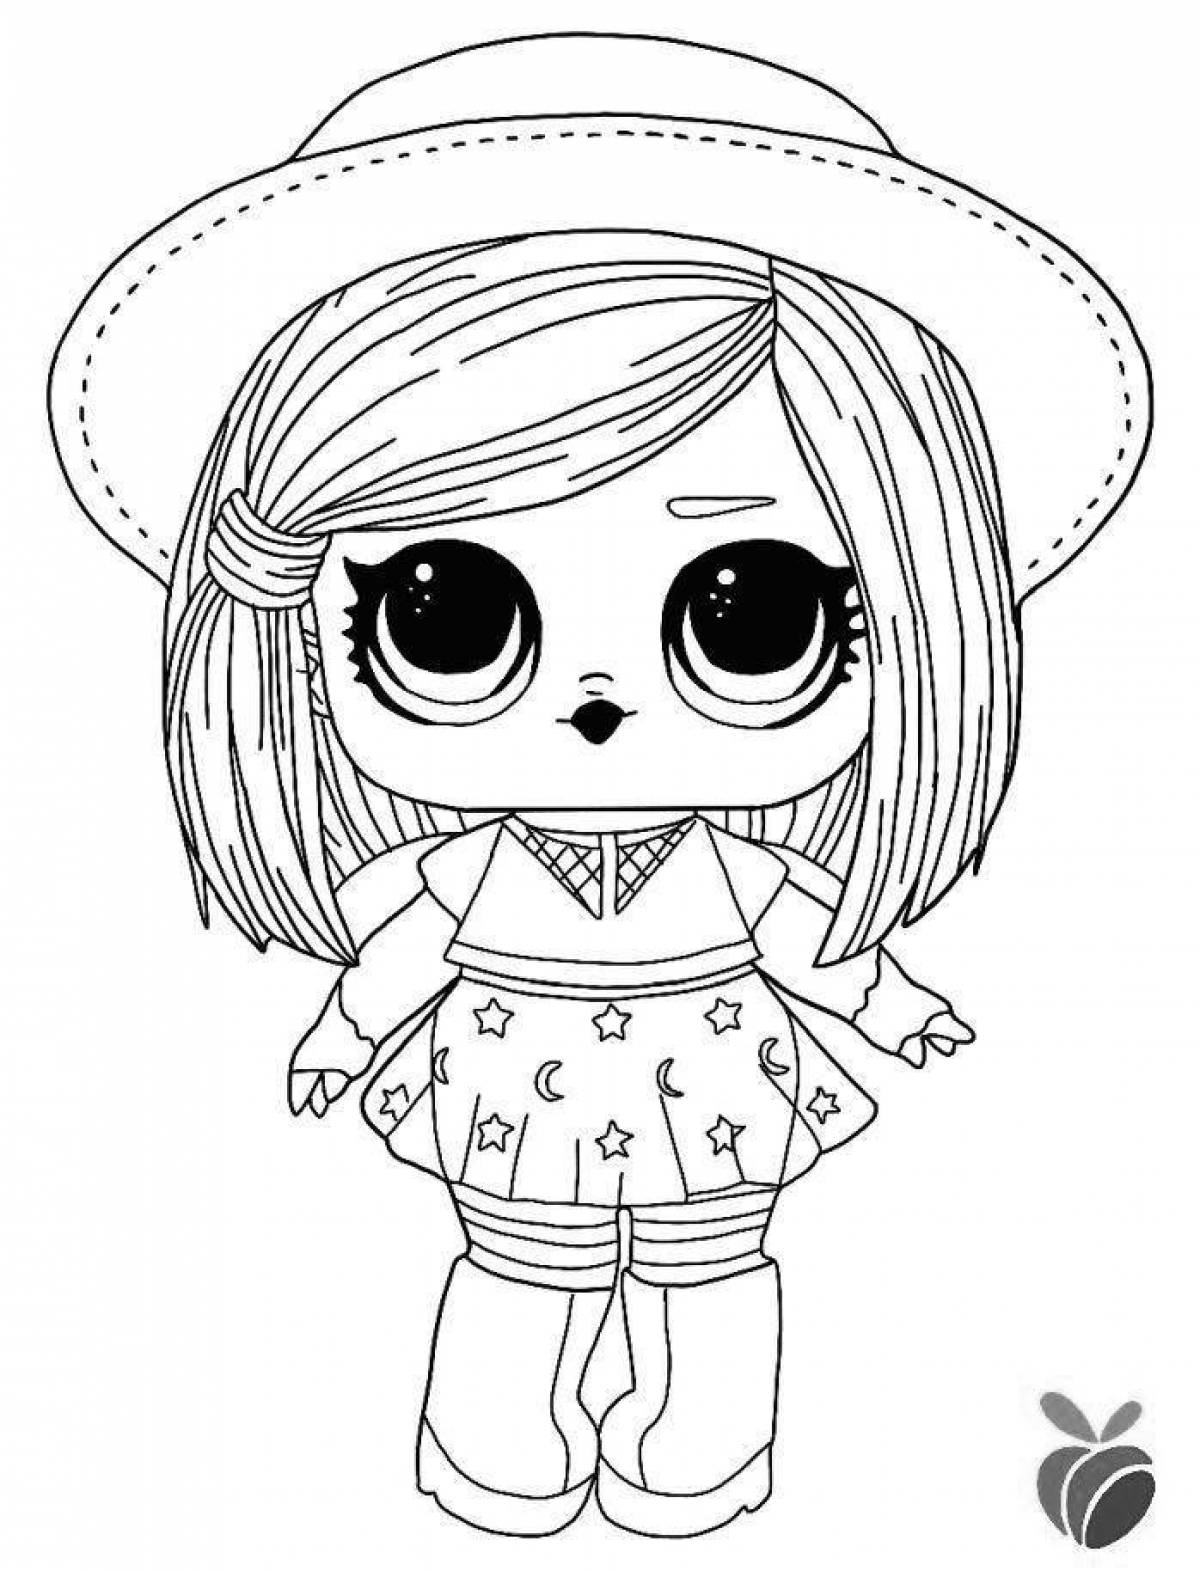 Joyful lol print doll coloring pages